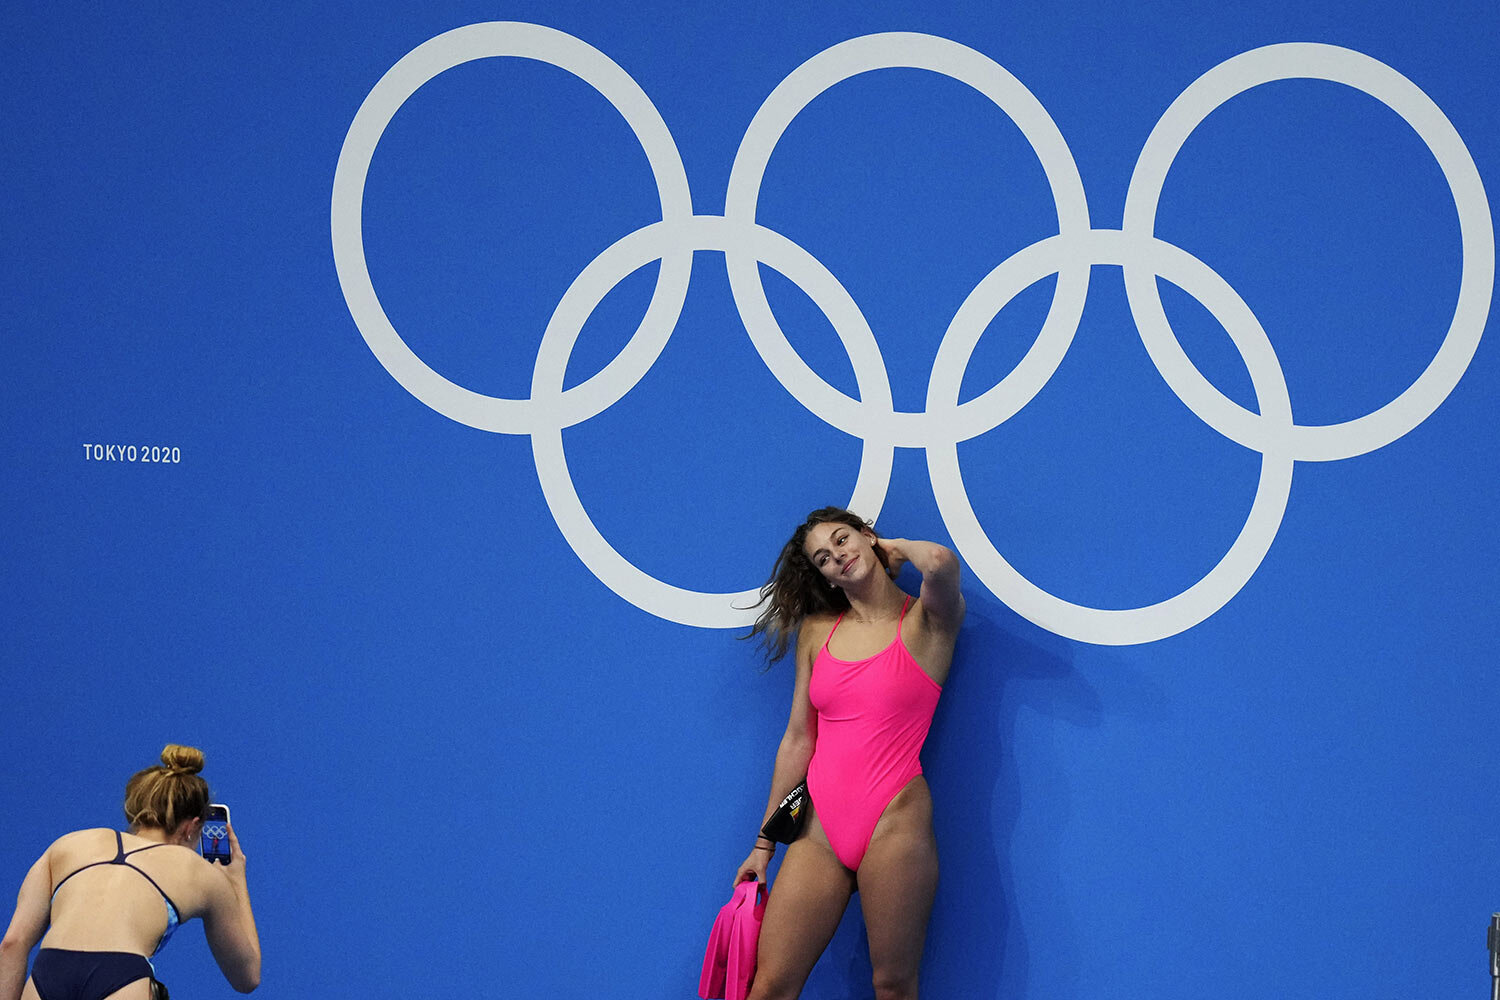  Hannah Kuechler of Germany poses for photos at the Olympic rings prior to a swimming practice session at the Tokyo Aquatics Center at the 2020 Summer Olympics, Thursday, July 22, 2021, in Tokyo, Japan. (AP Photo/Matthias Schrader) 